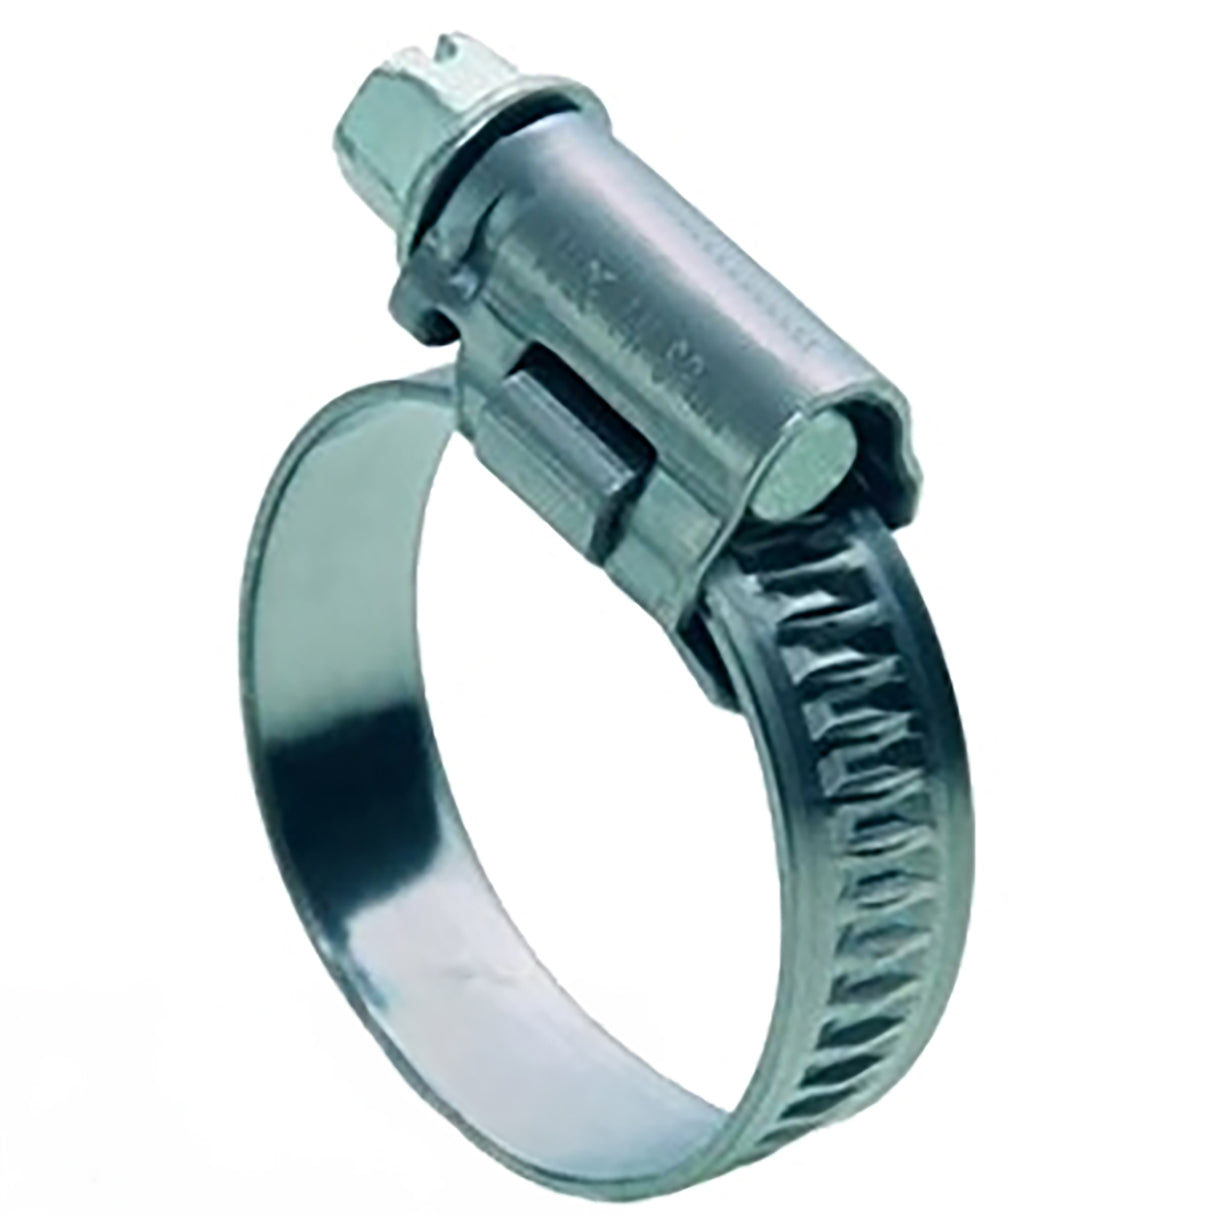 Hose clamp stainless steel 12-22 mm